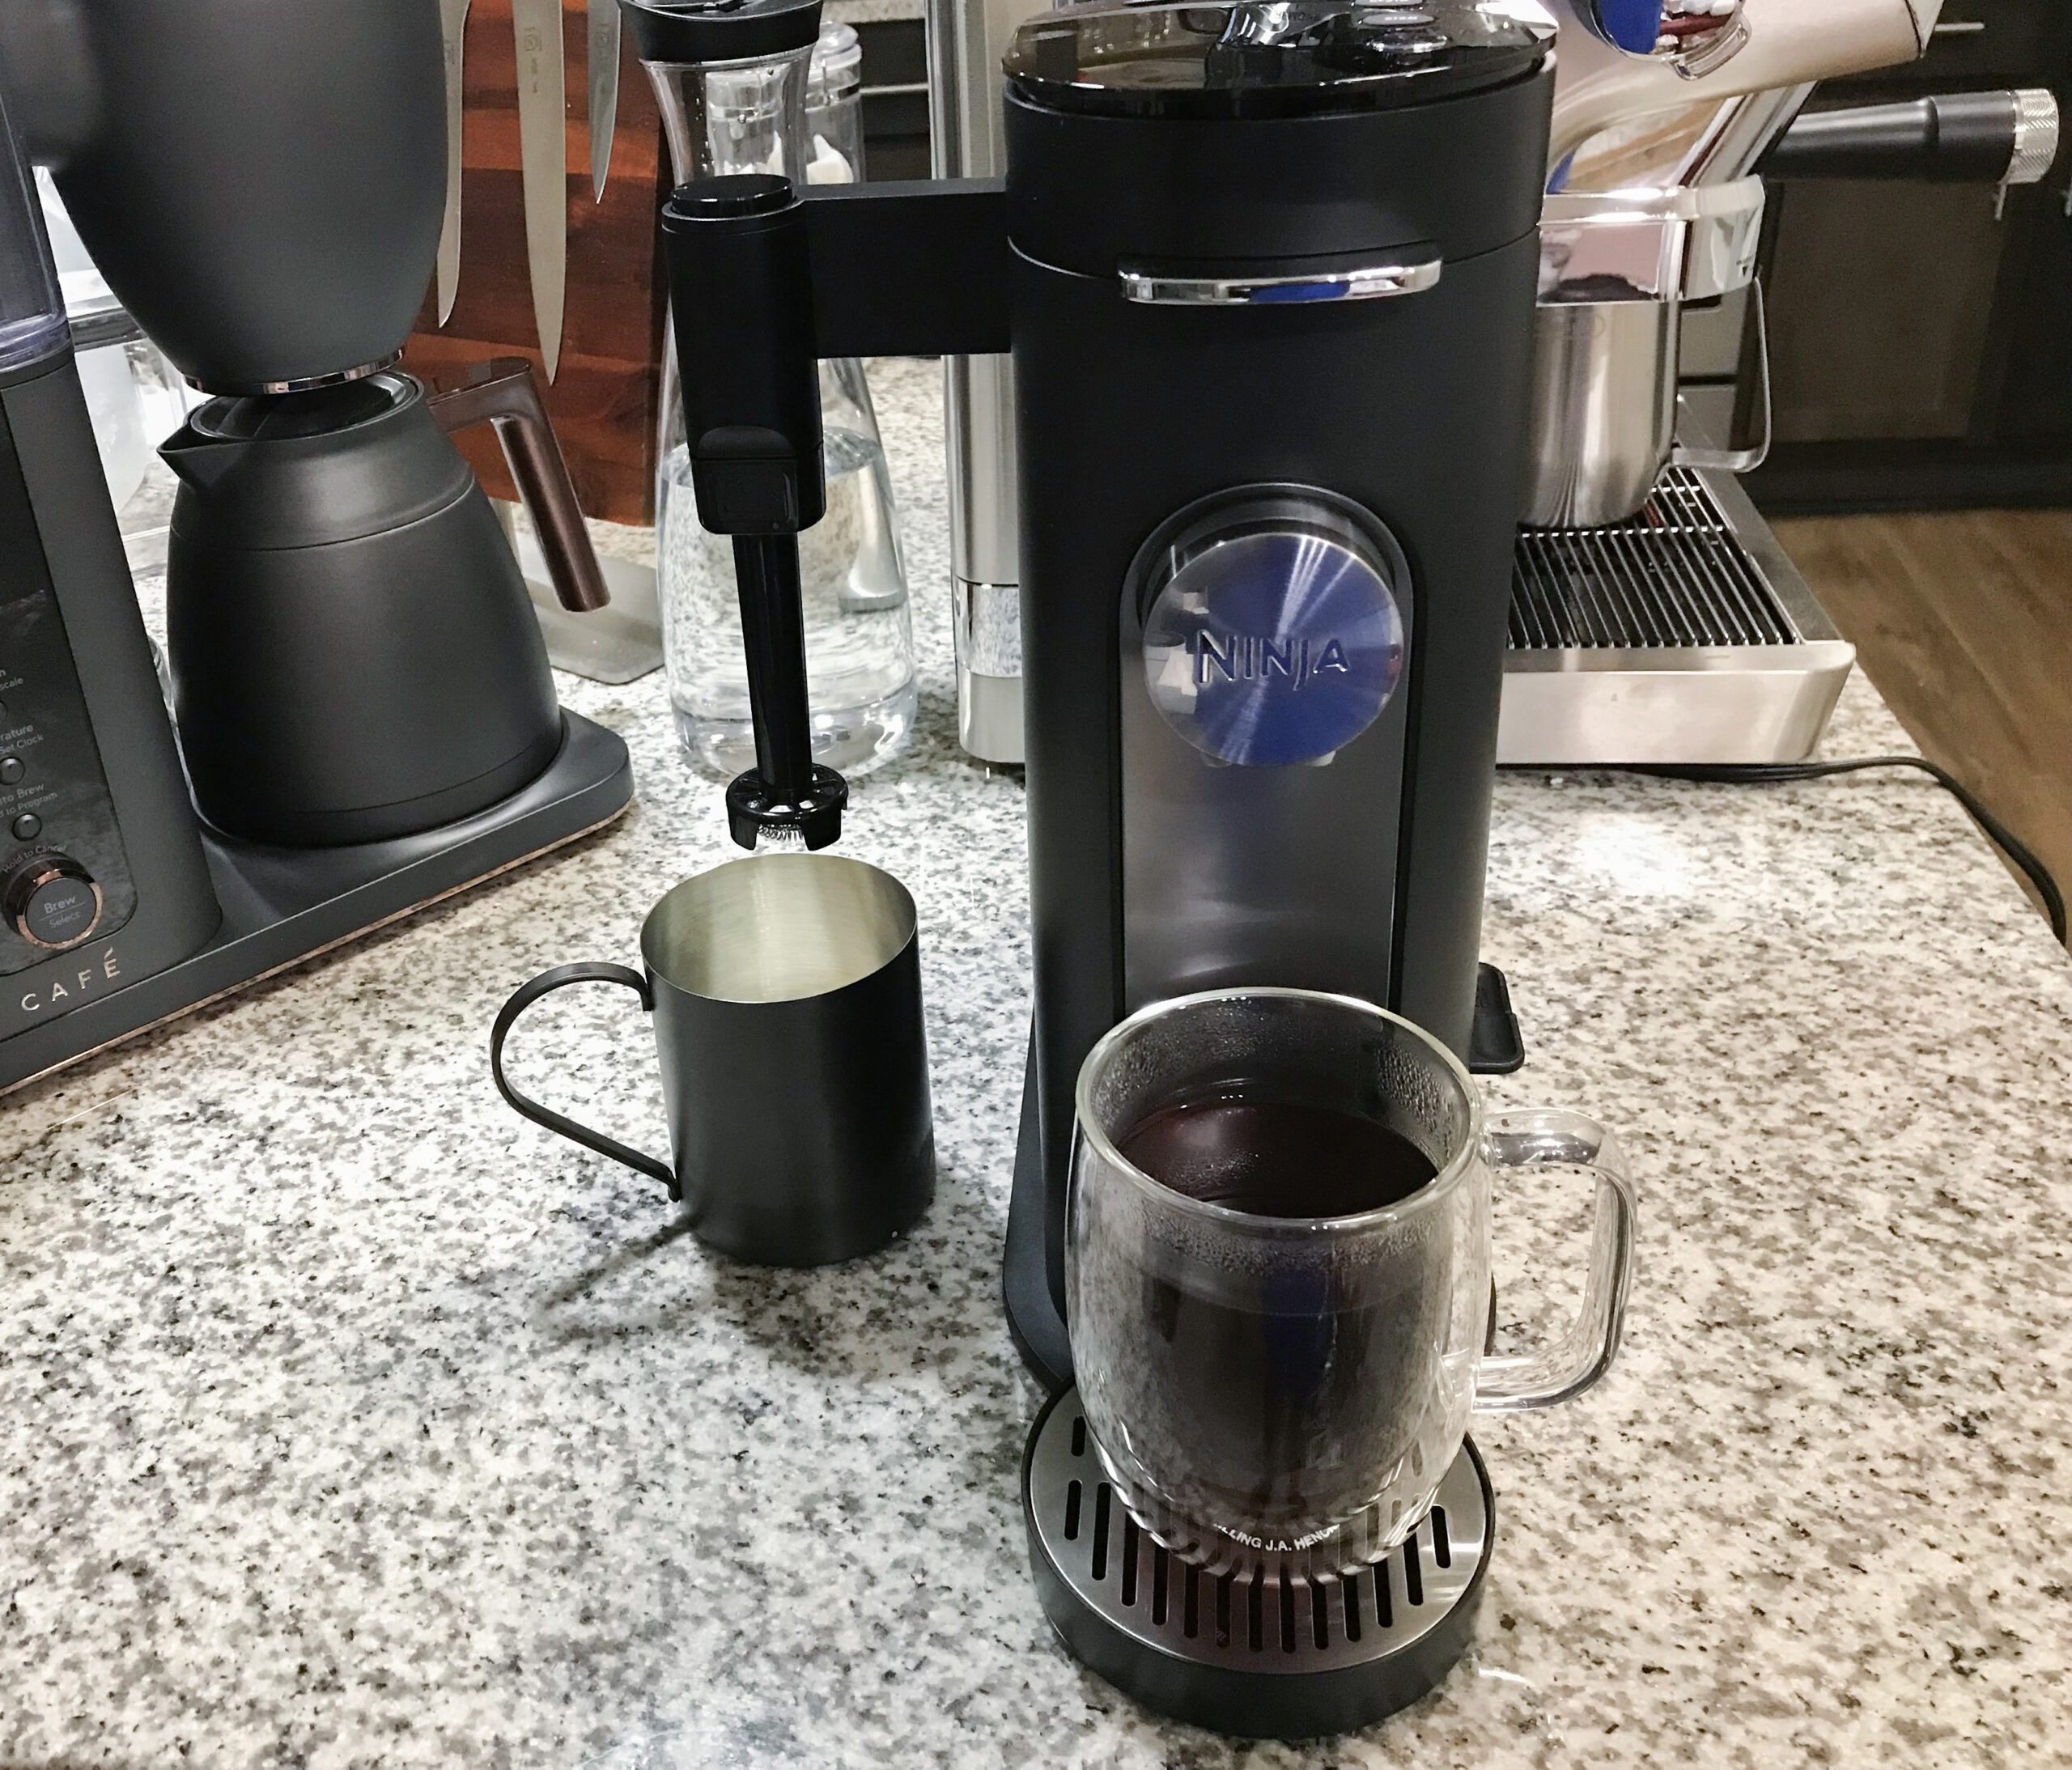 Ninja Pods & Grounds Single-Serve Coffee Maker drip coffee maker on a crowded kitchen counter